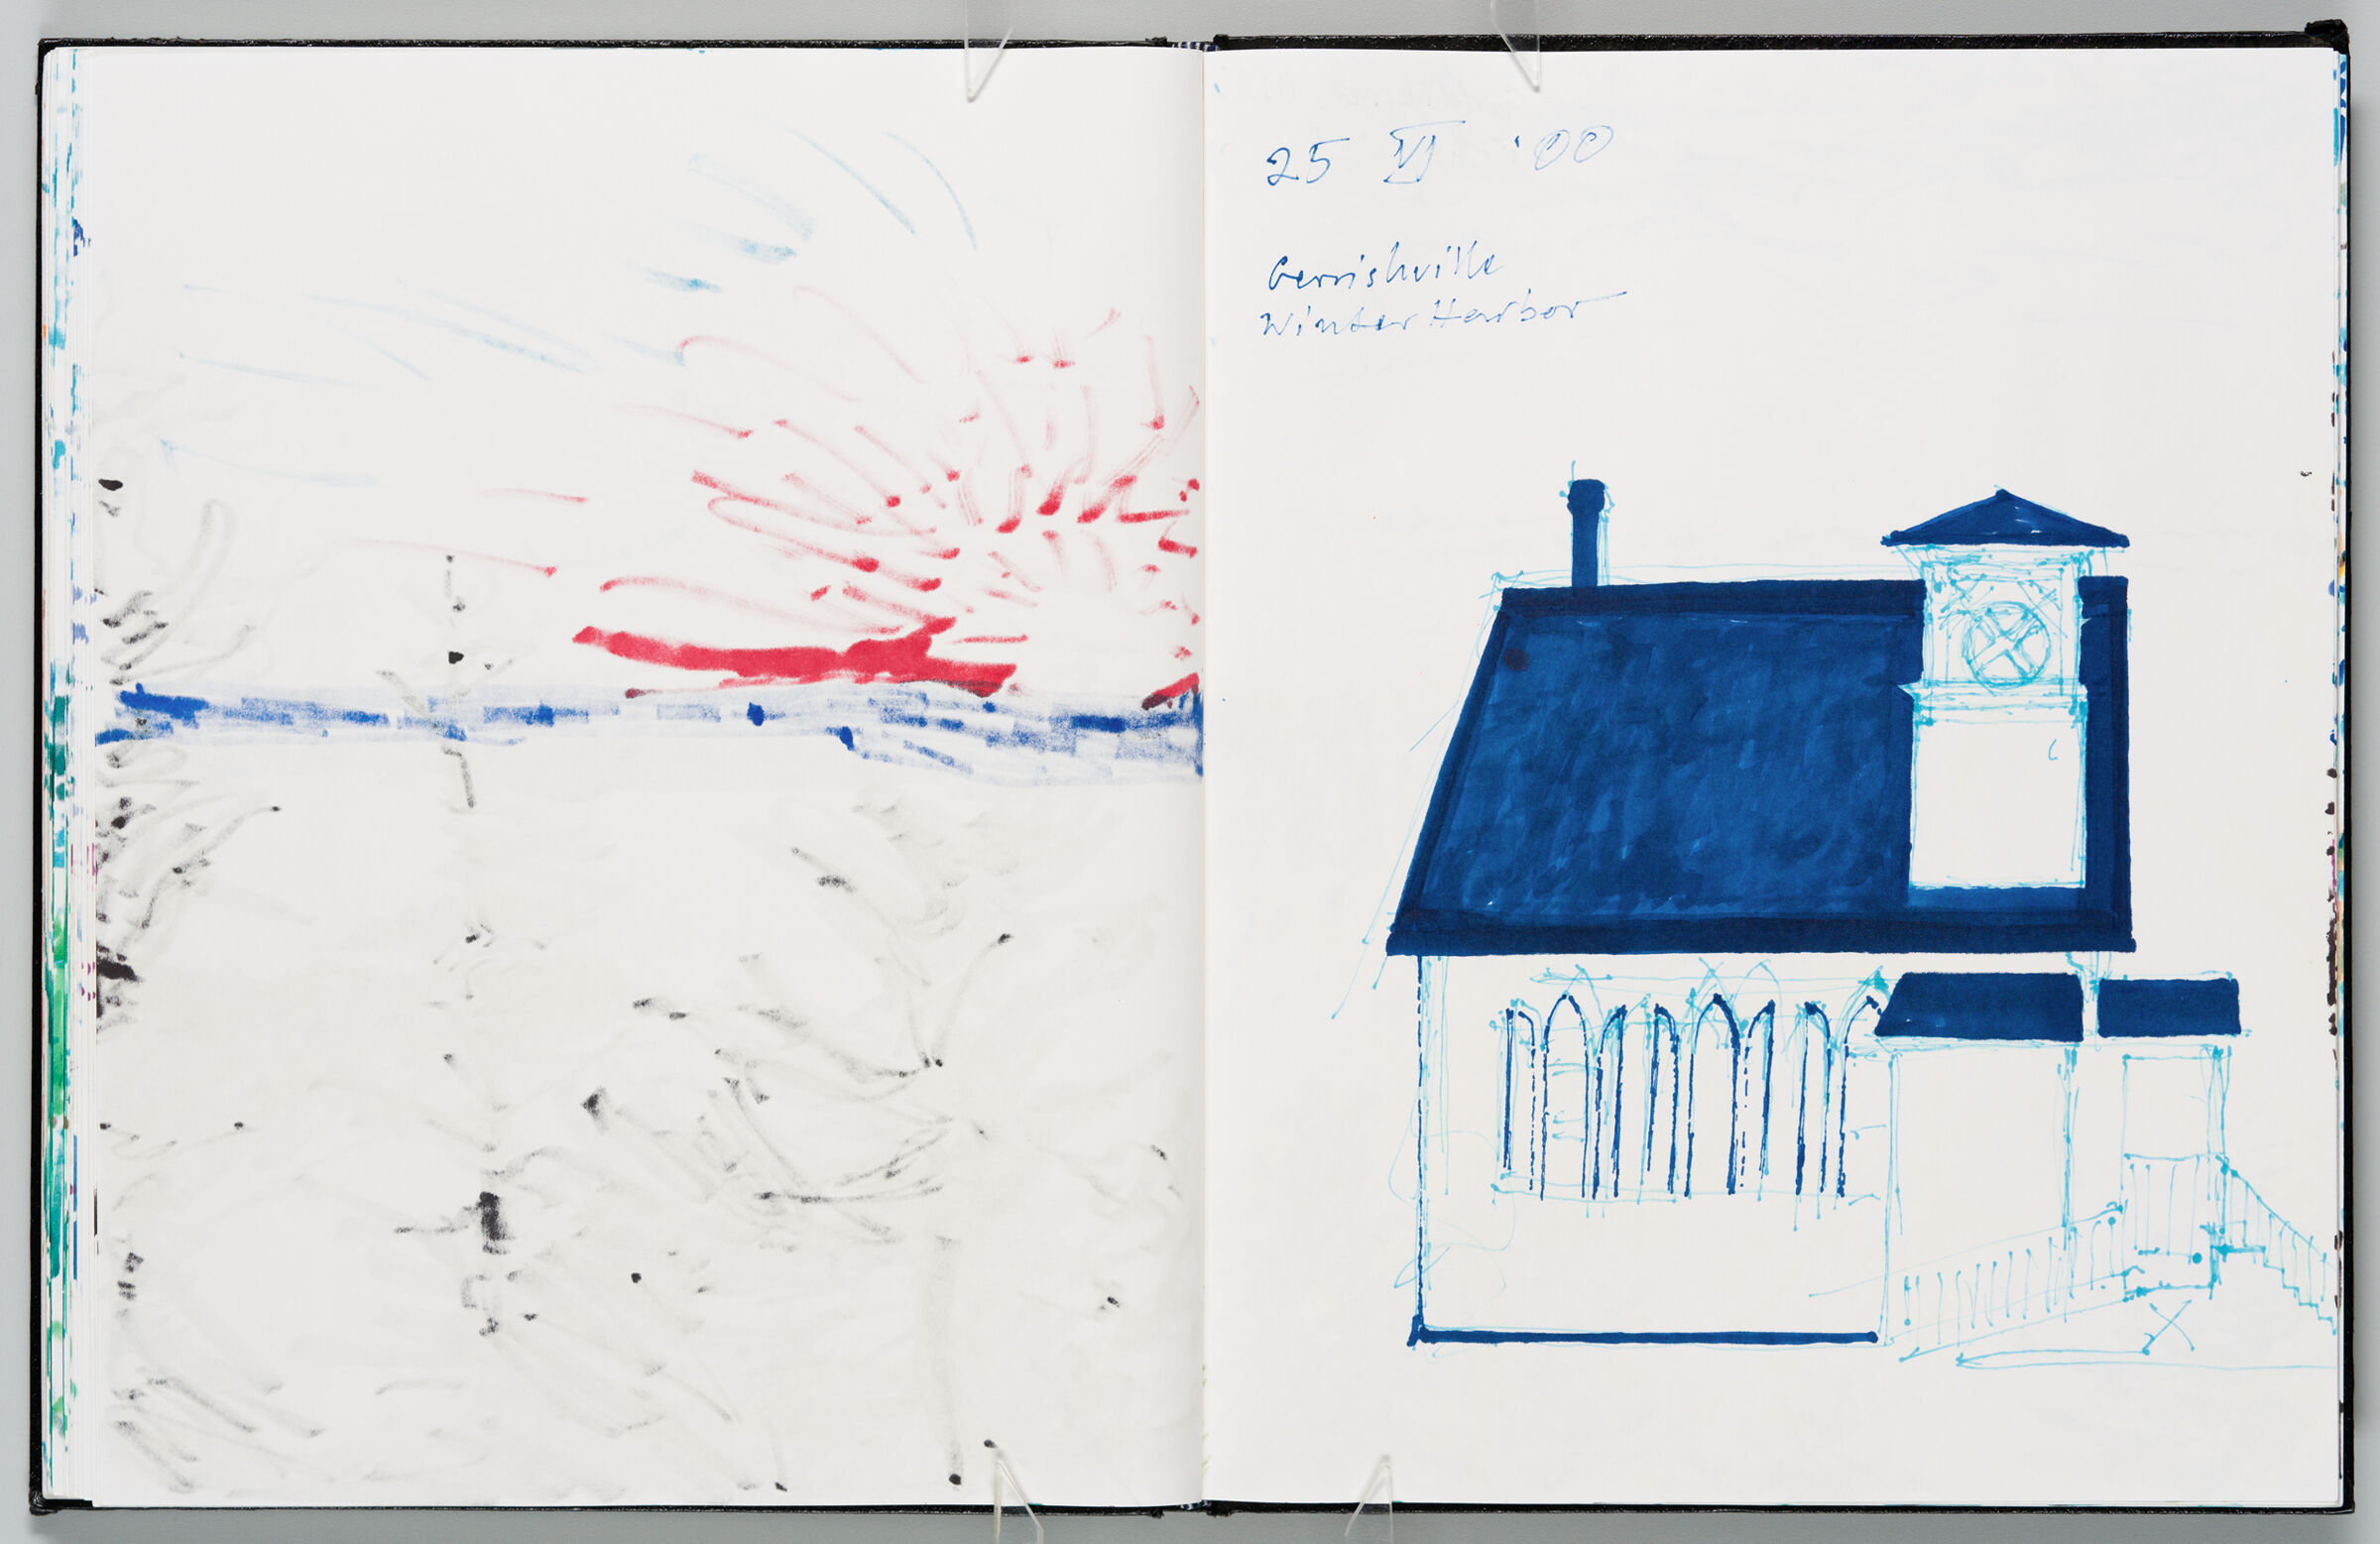 Untitled (Bleed-Through From Previous Page, Left Page); Untitled (Winter Harbor Scene, Right Page)